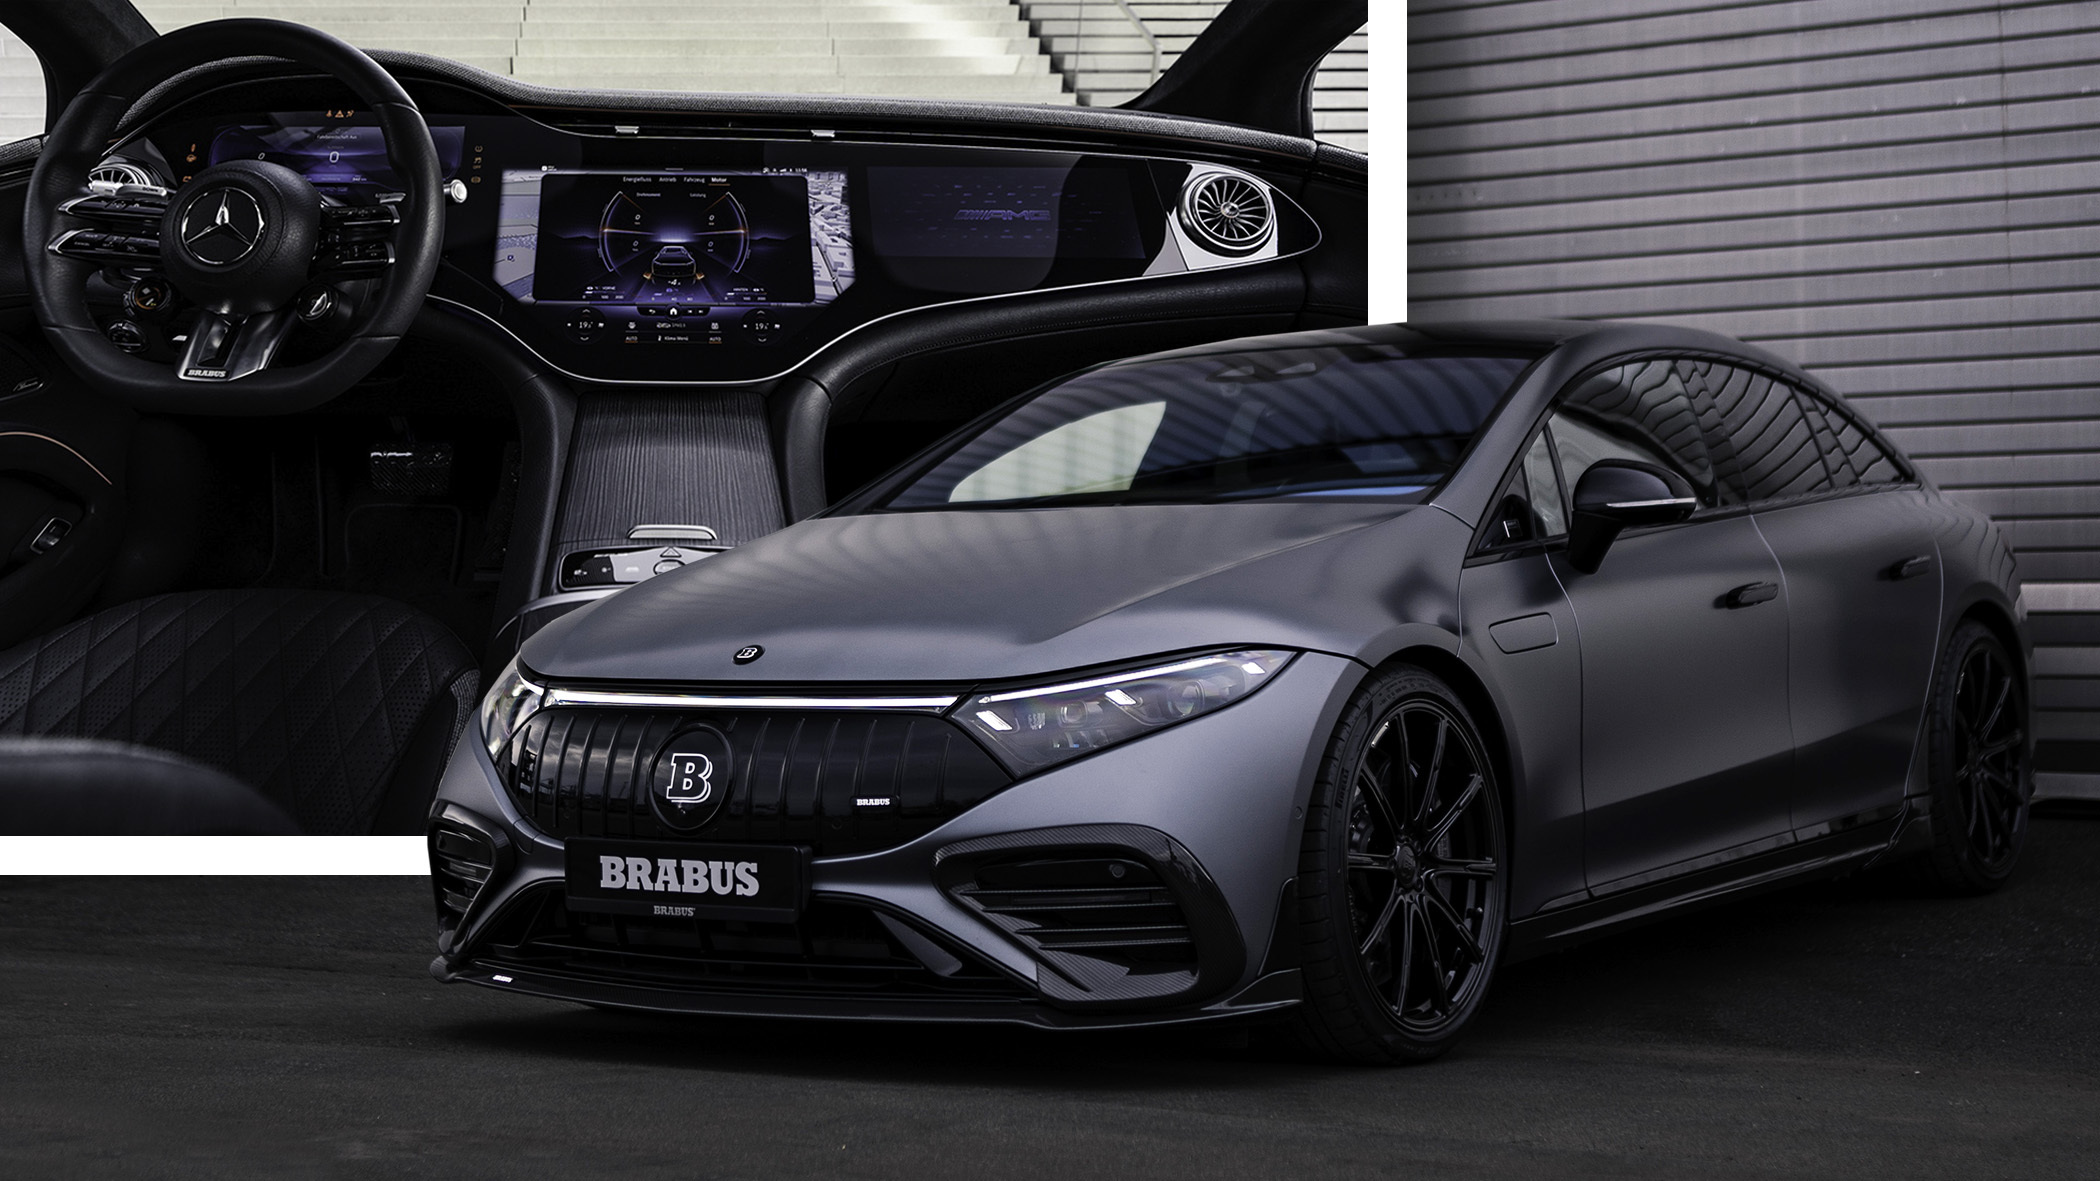 Brabus' Mercedes-AMG EQS 53 Adds More Range And Visual Drama For